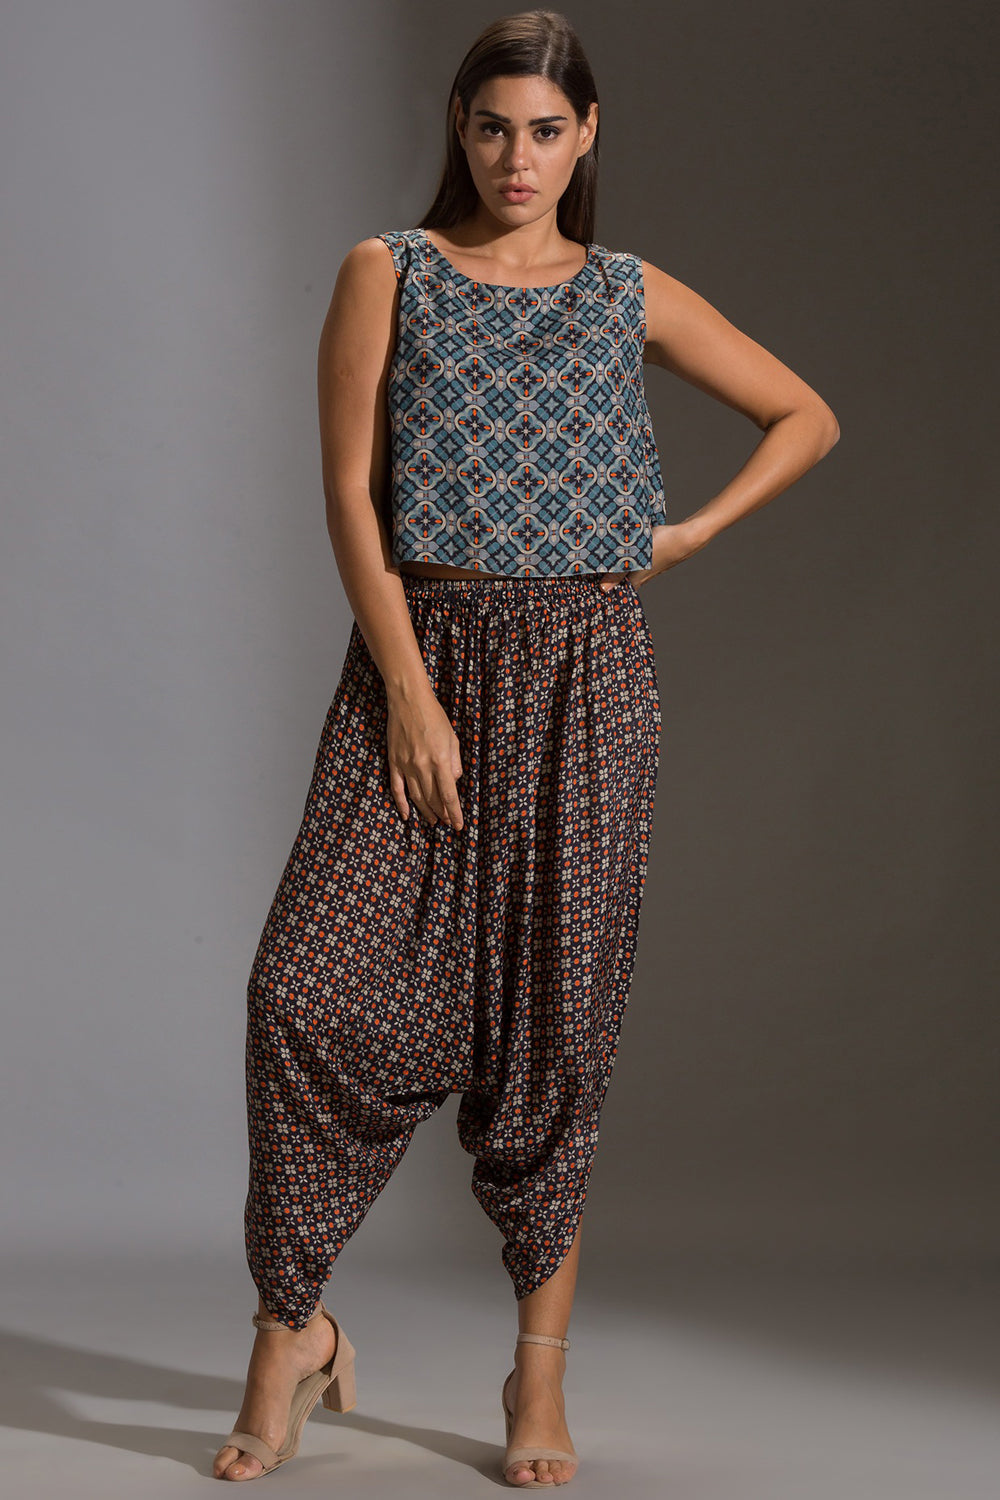 Arabesque Geometrical Print Dhoti Paired With Top And Cape